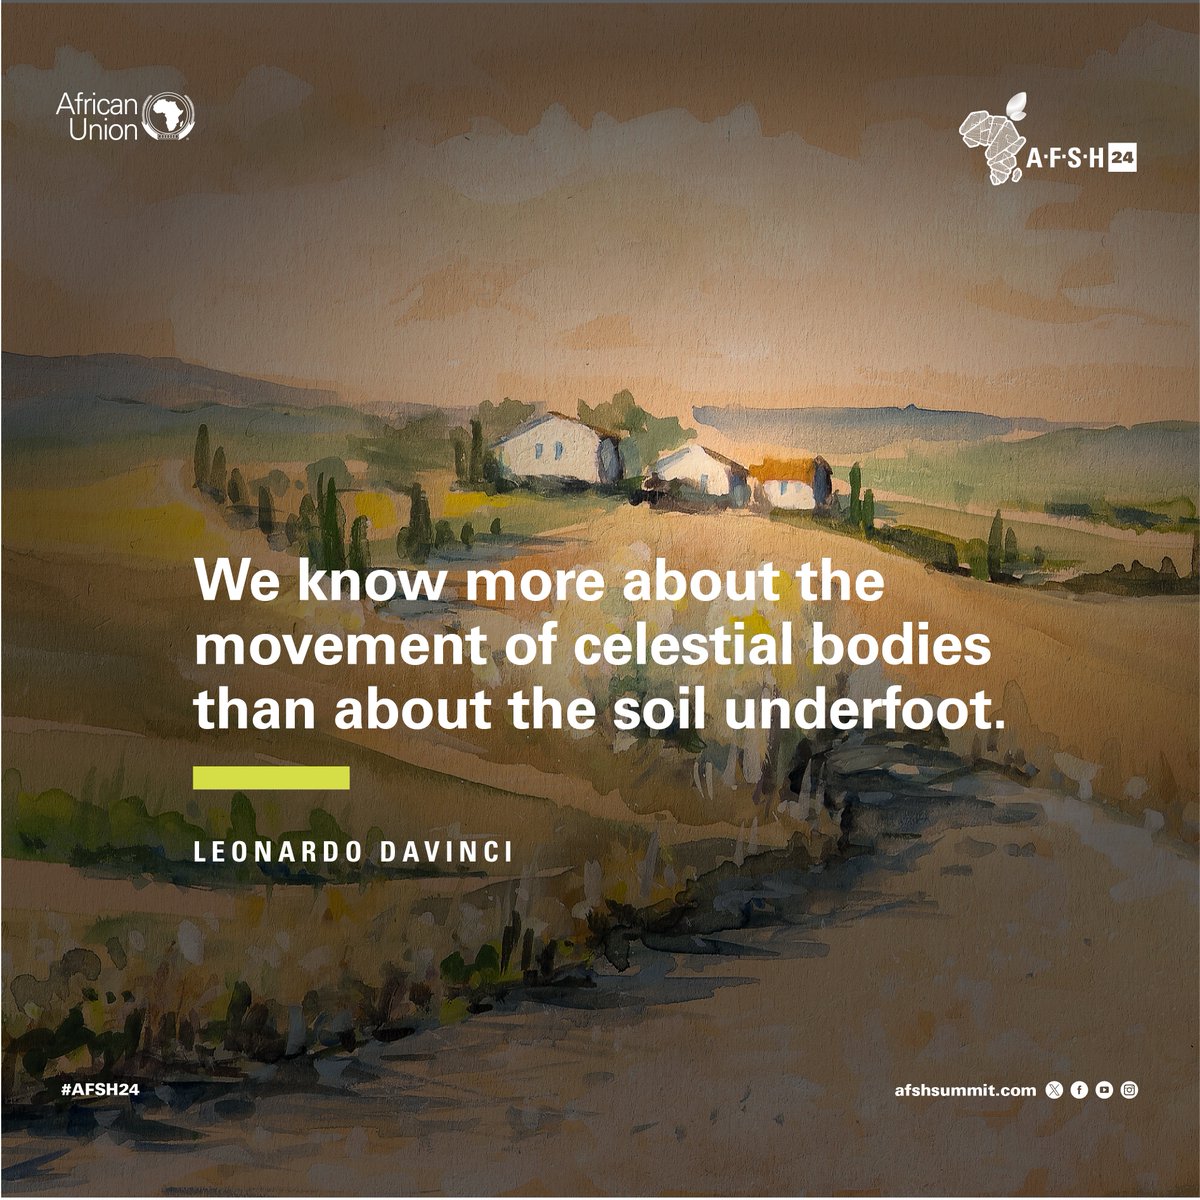 Looking after our soil will boost Africa's food security.

#AFSH24
#SoilHealth
#Agenda2063
#ListenToTheland